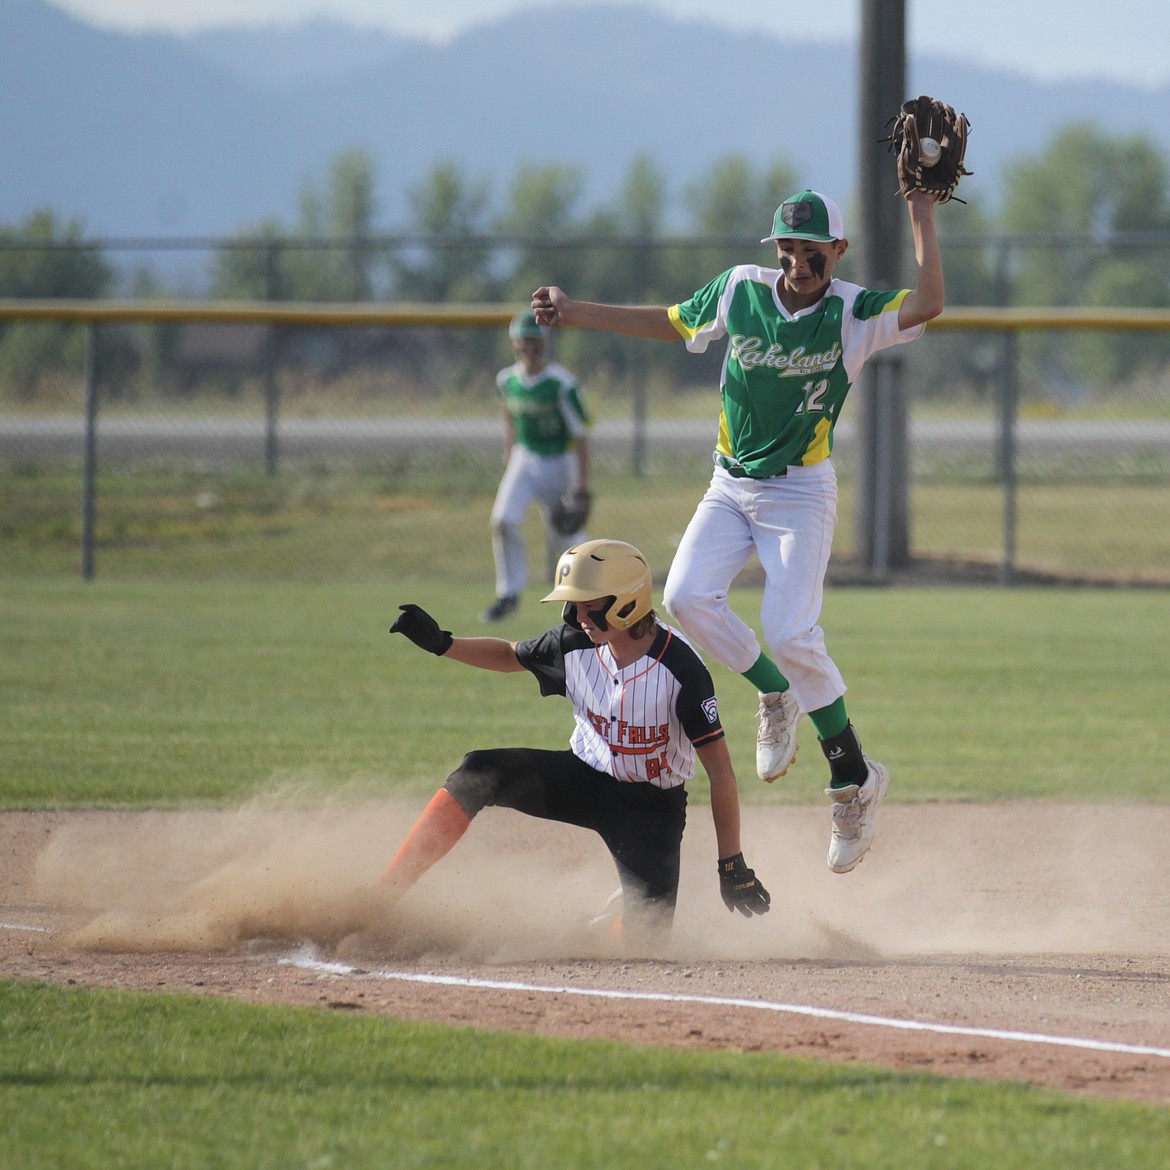 MARK NELKE/Press
Gavin Ahlgren (84) of Post Falls slides safely into third base as Lakeland third baseman Hunter Cailteaux snags the throw during the Little League Juniors District 1 championship game Tuesday at Croffoot Park in Hayden.